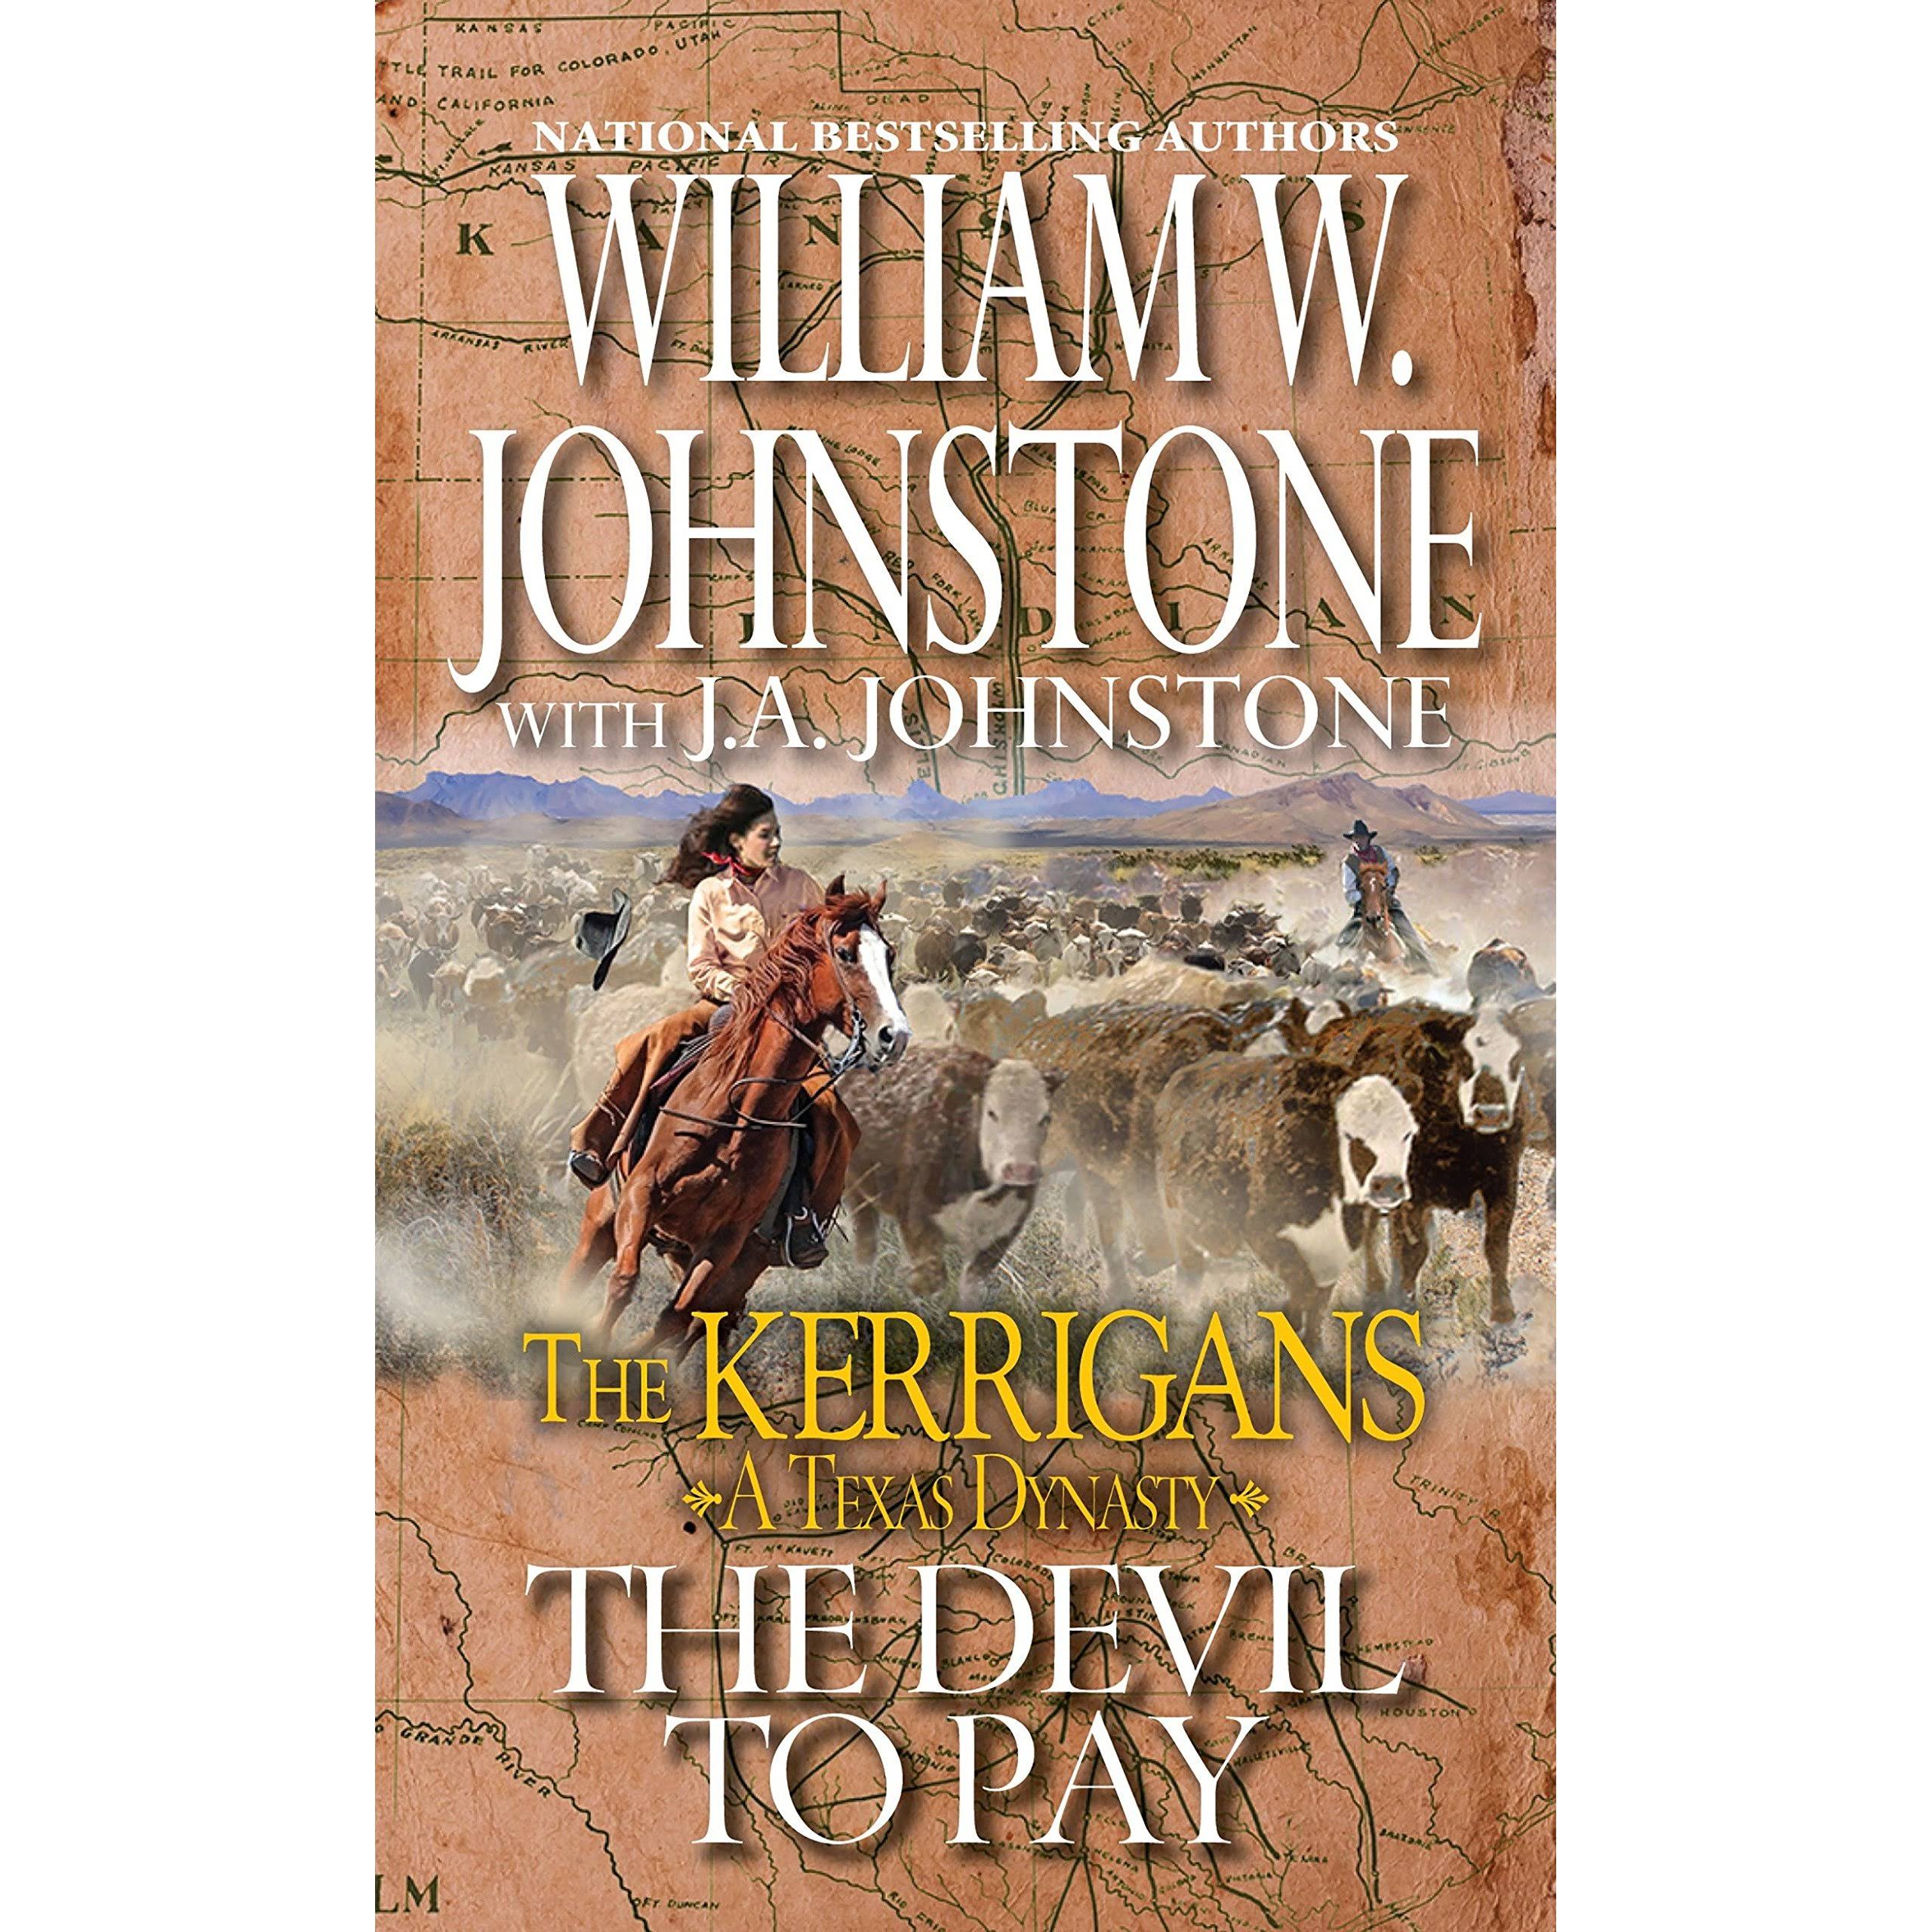 The Devil to Pay - William W. Johnstone with J.A. Johnstone